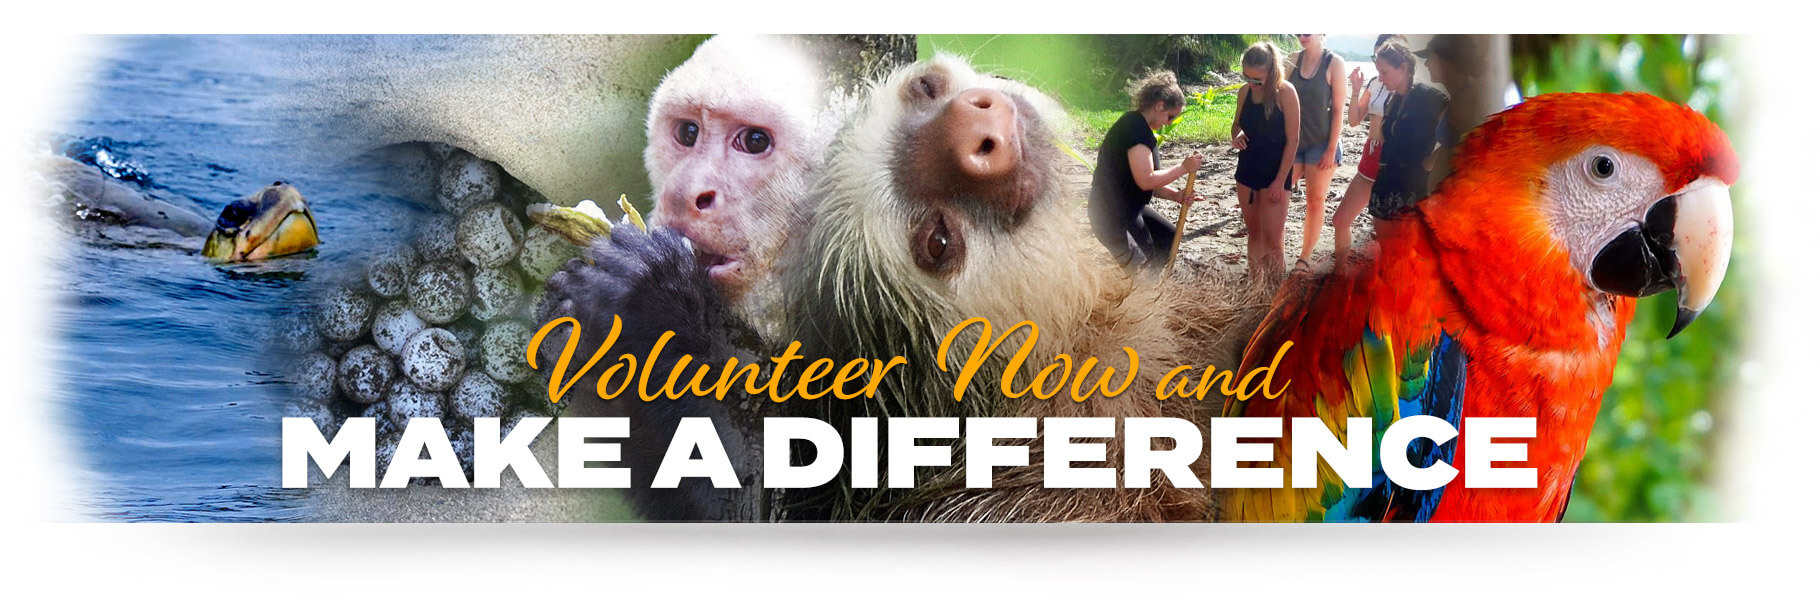 Volunteer now and make a difference